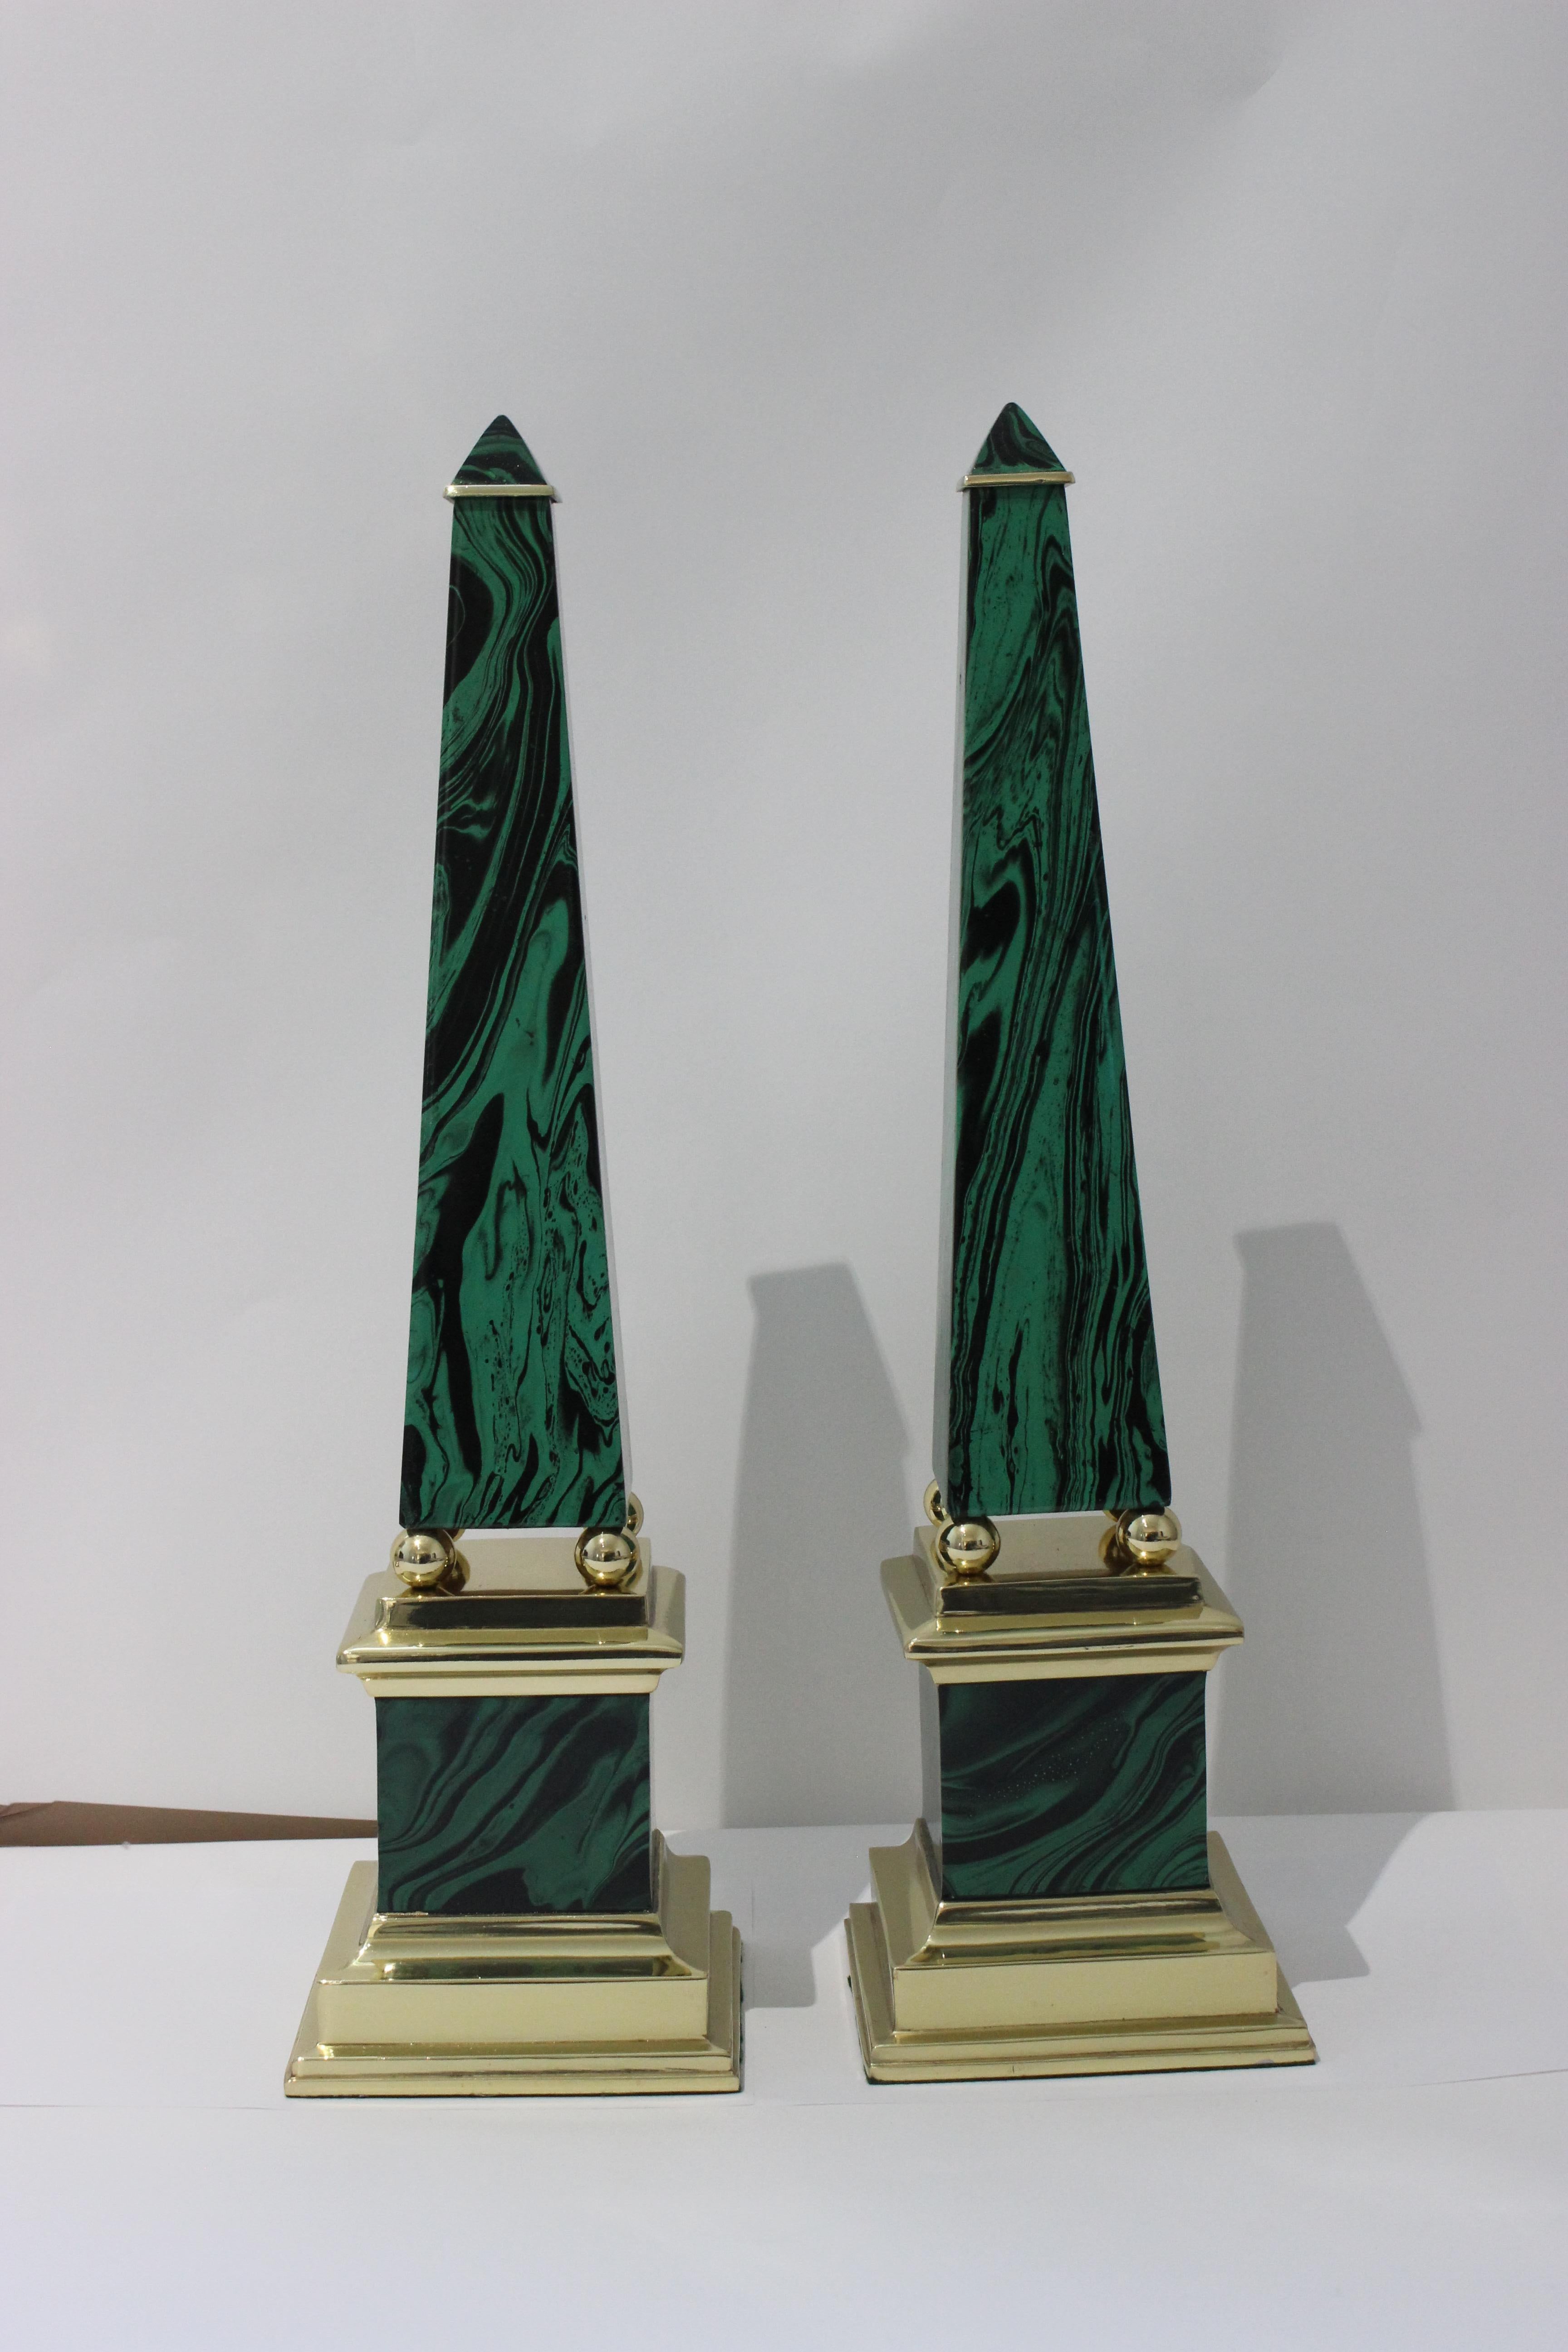 20th Century Pair of Egyptian Revival Oblelisks by Chapman For Sale